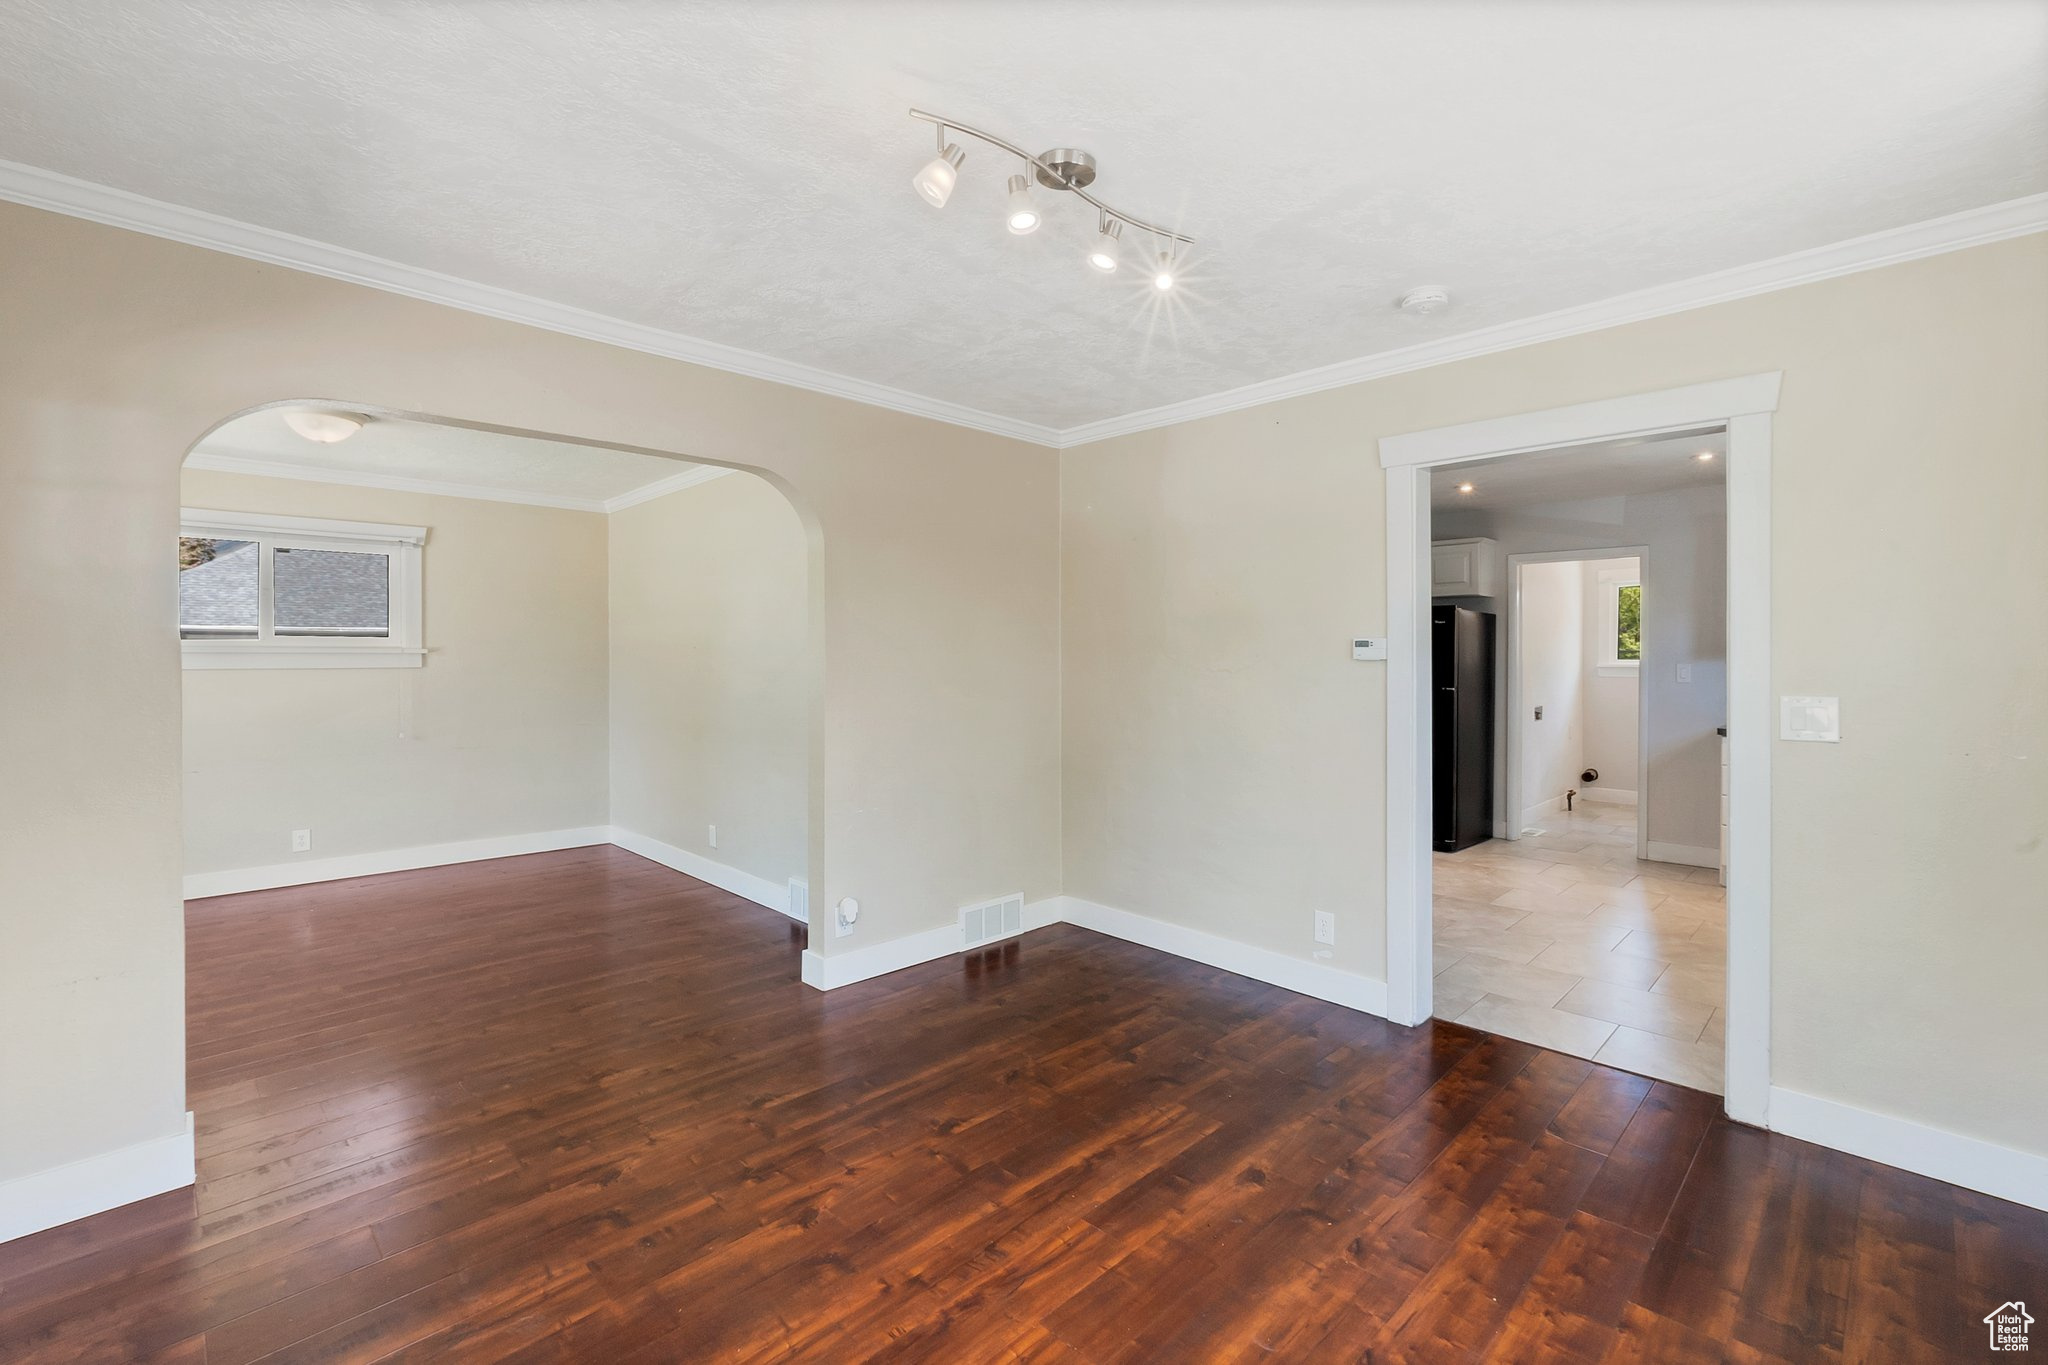 Unfurnished room with tile floors, crown molding, and rail lighting